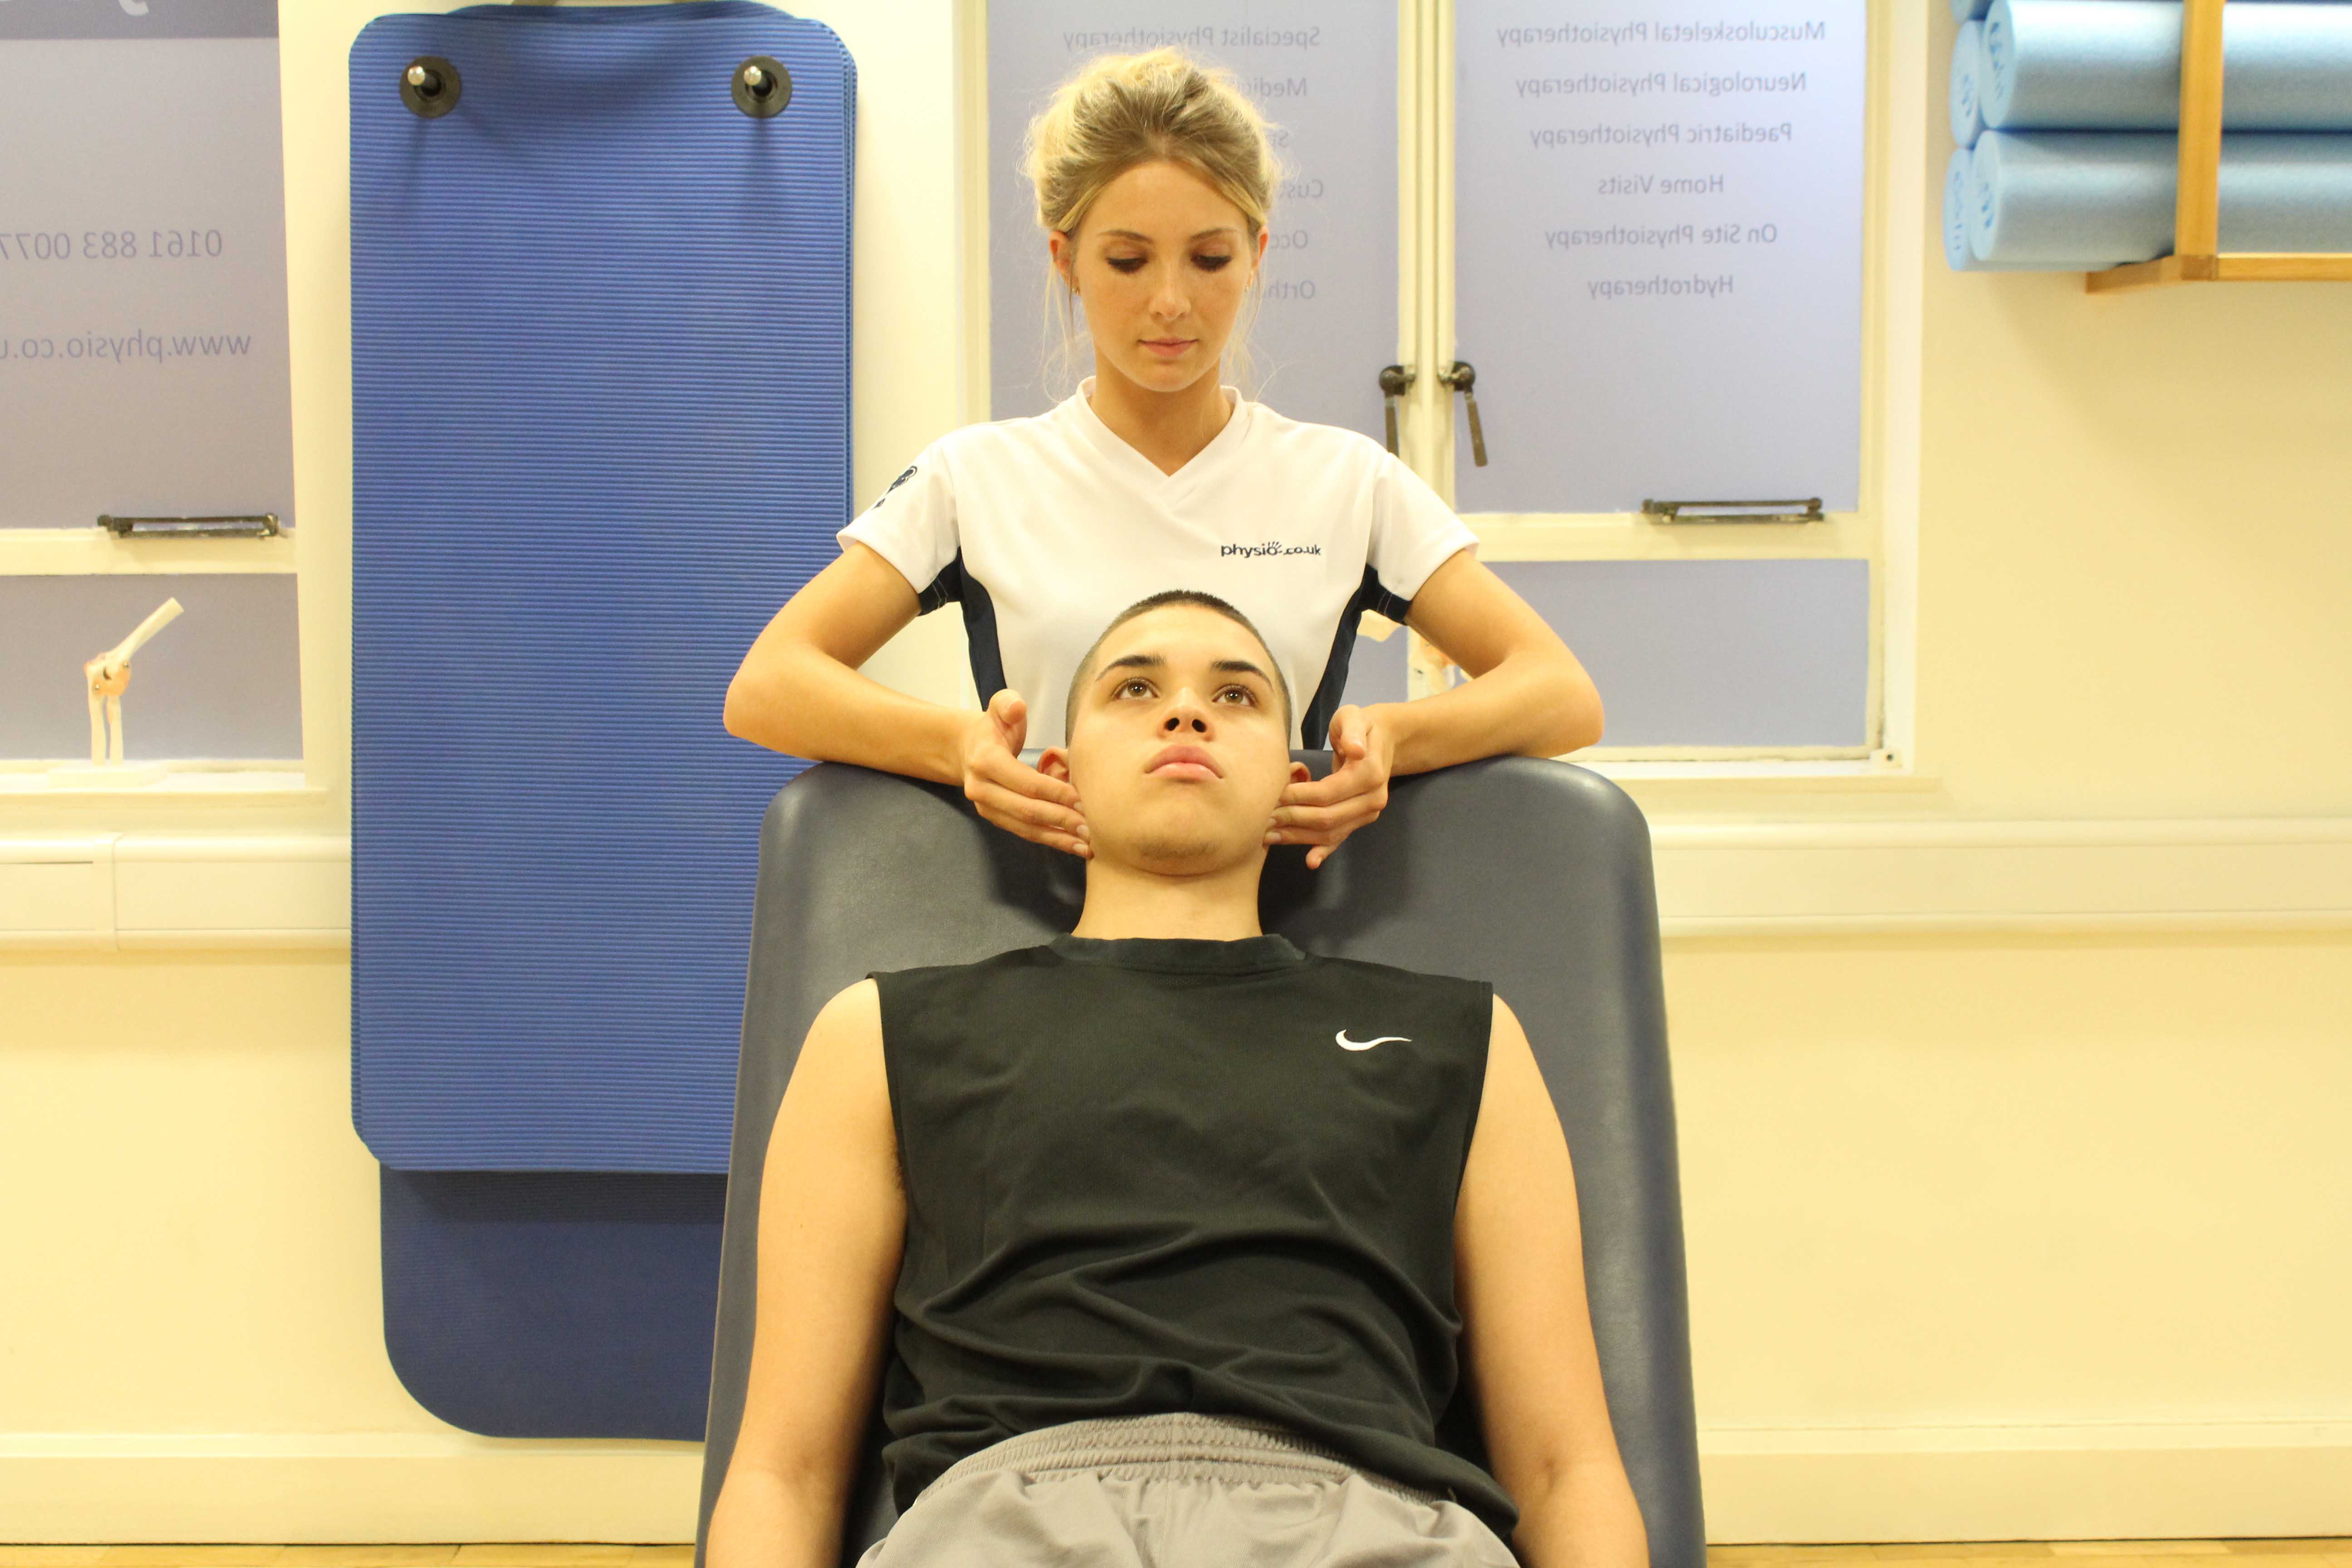 Soft tissue massage and mobilisation of the jaw to relieve stiffness and pain